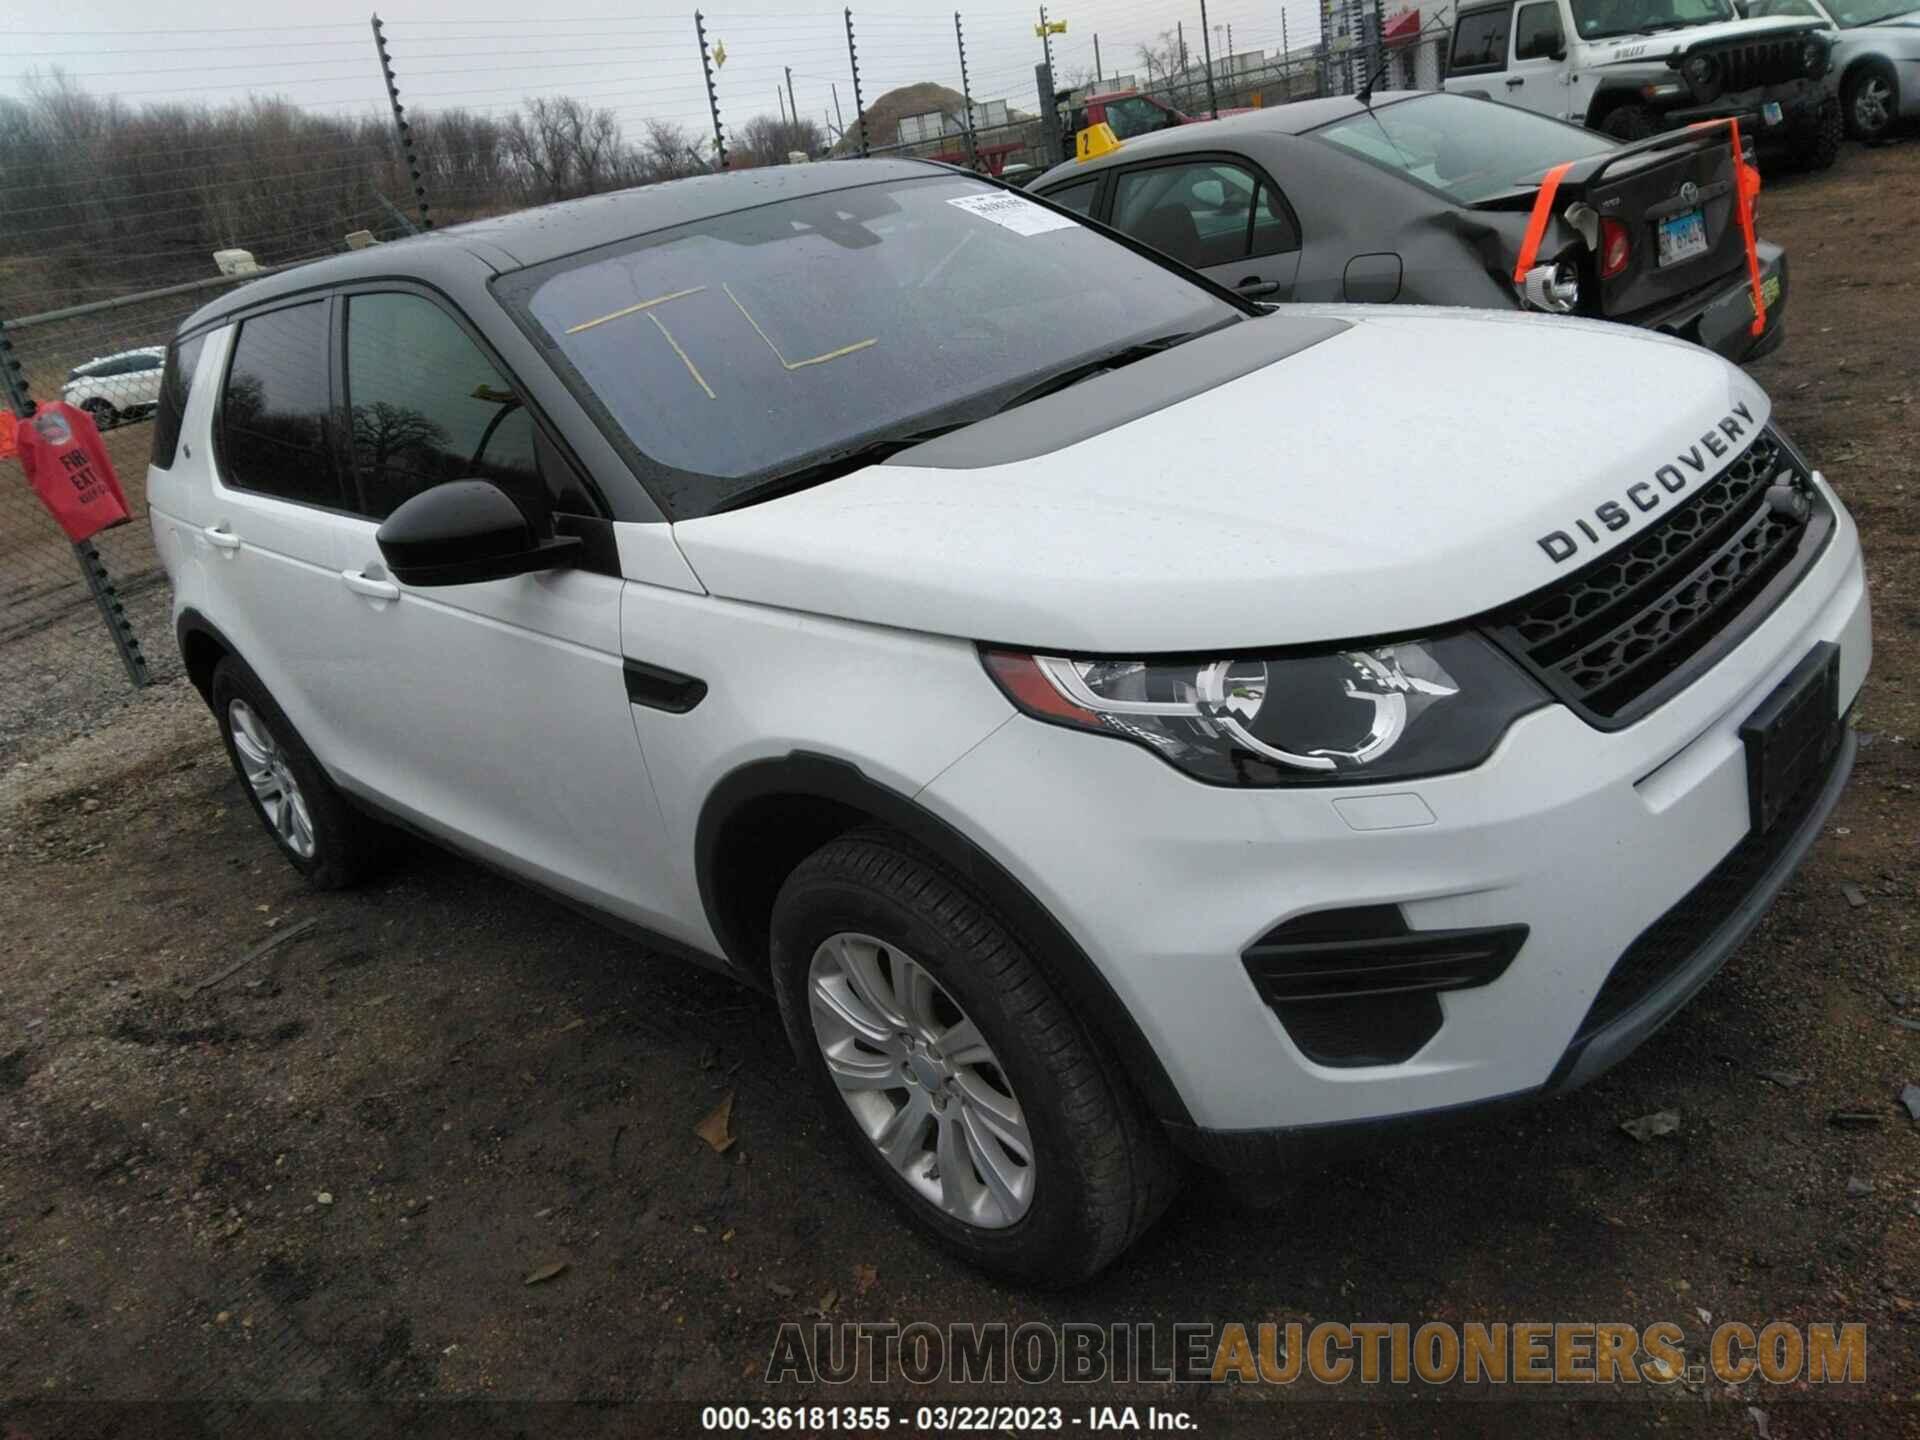 SALCP2RX8JH757390 LAND ROVER DISCOVERY SPORT 2018